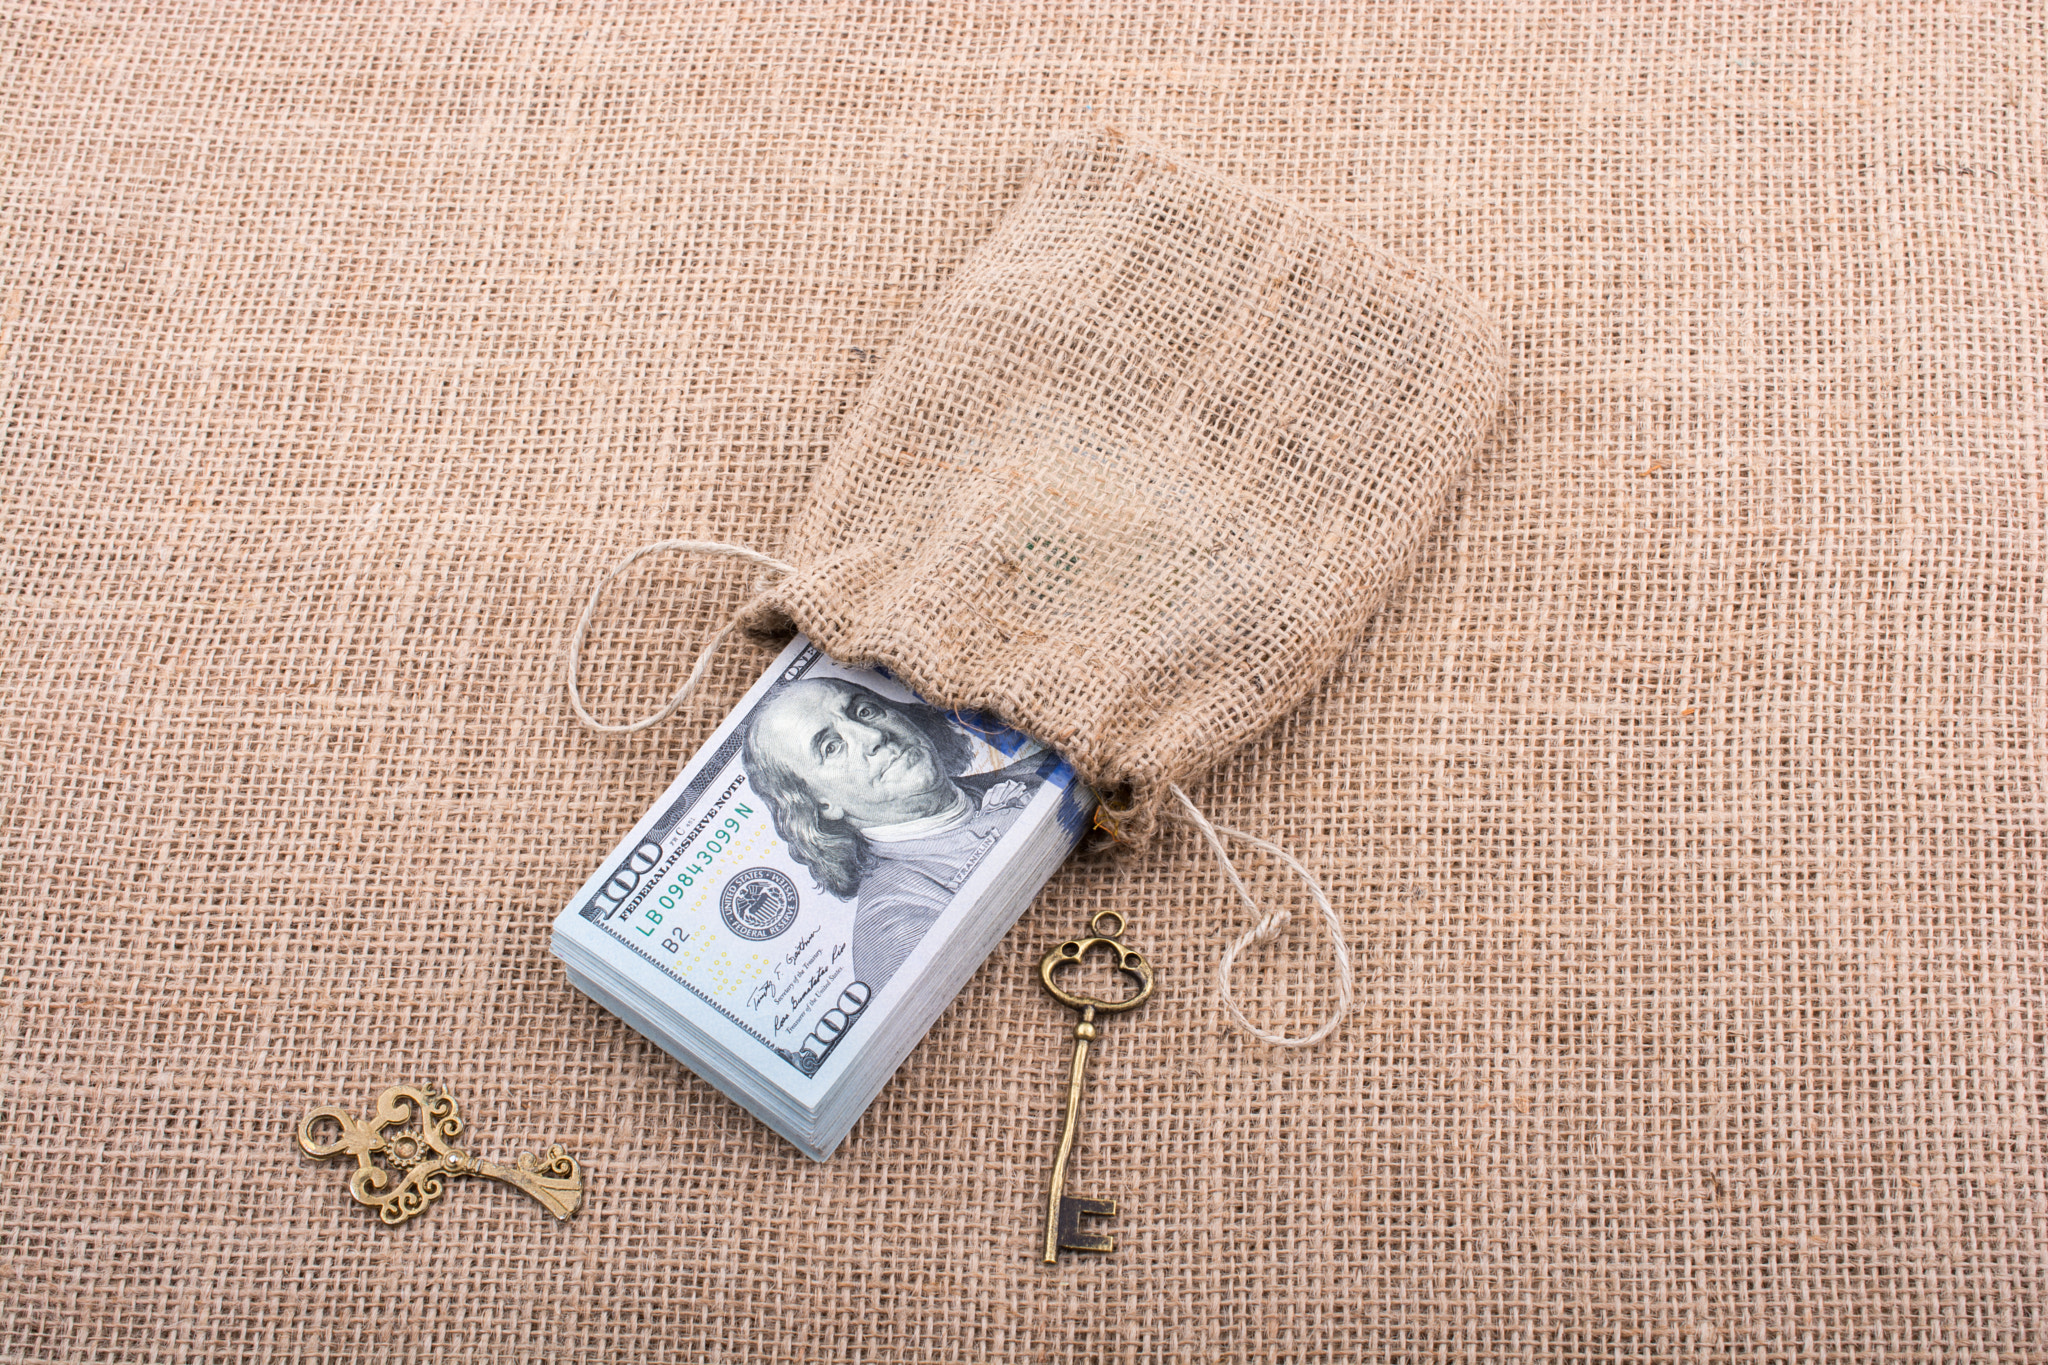 Retro key and bundle of US dollar in a sack